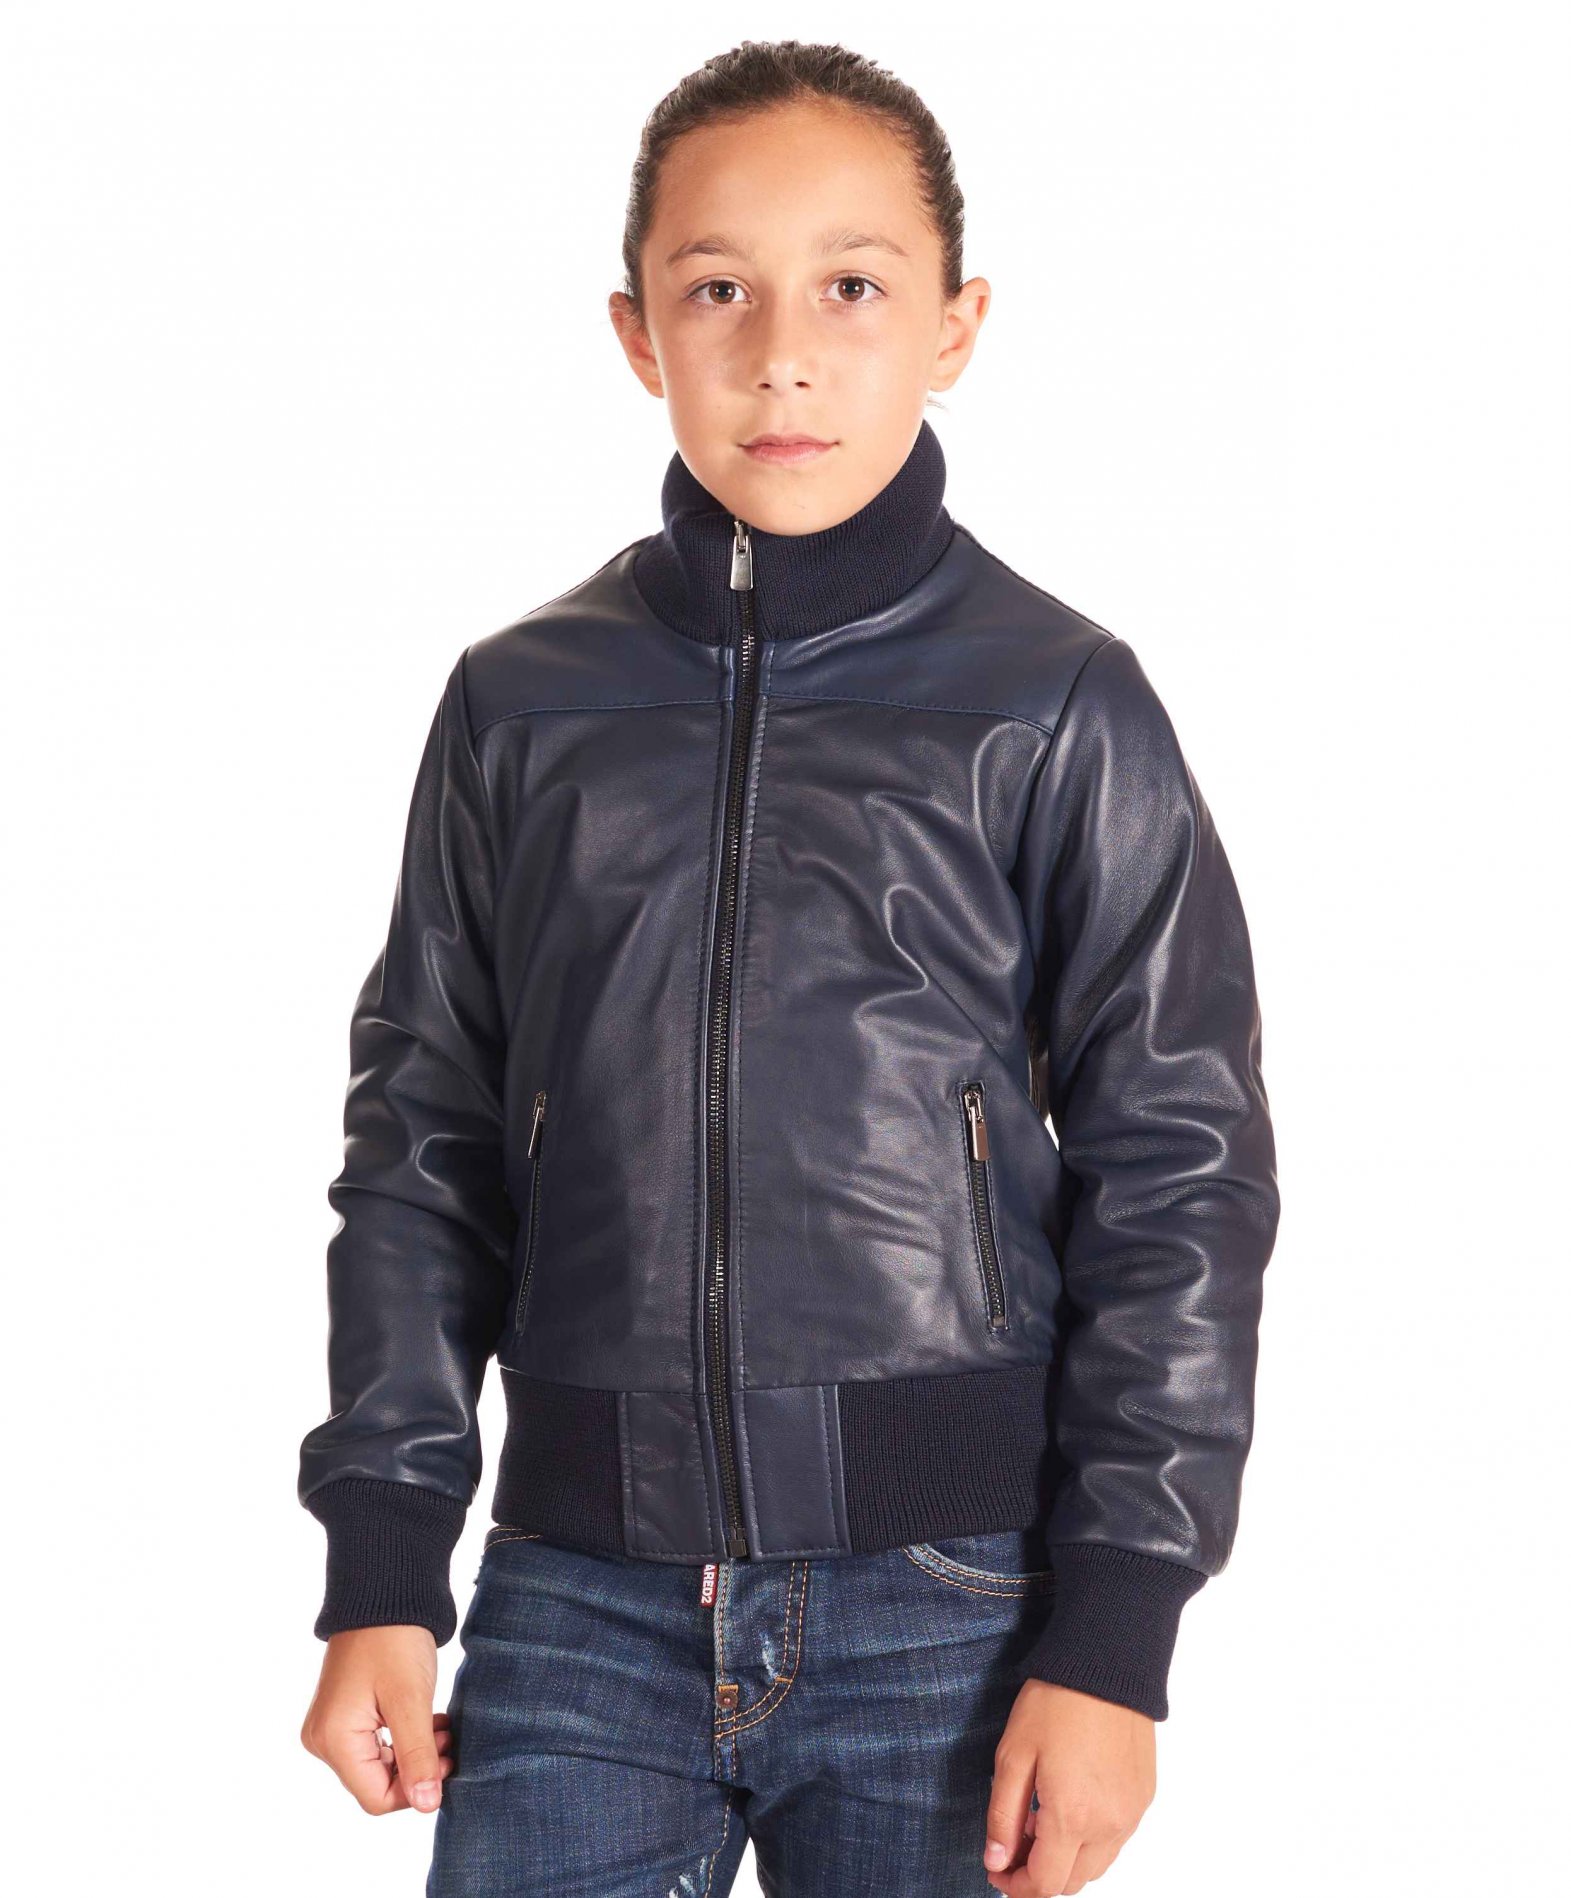 Handsome Cool Design Boys Leather Jacket For Autumn winter Kids Warm Coat  Bomber Baby Toddler Winter